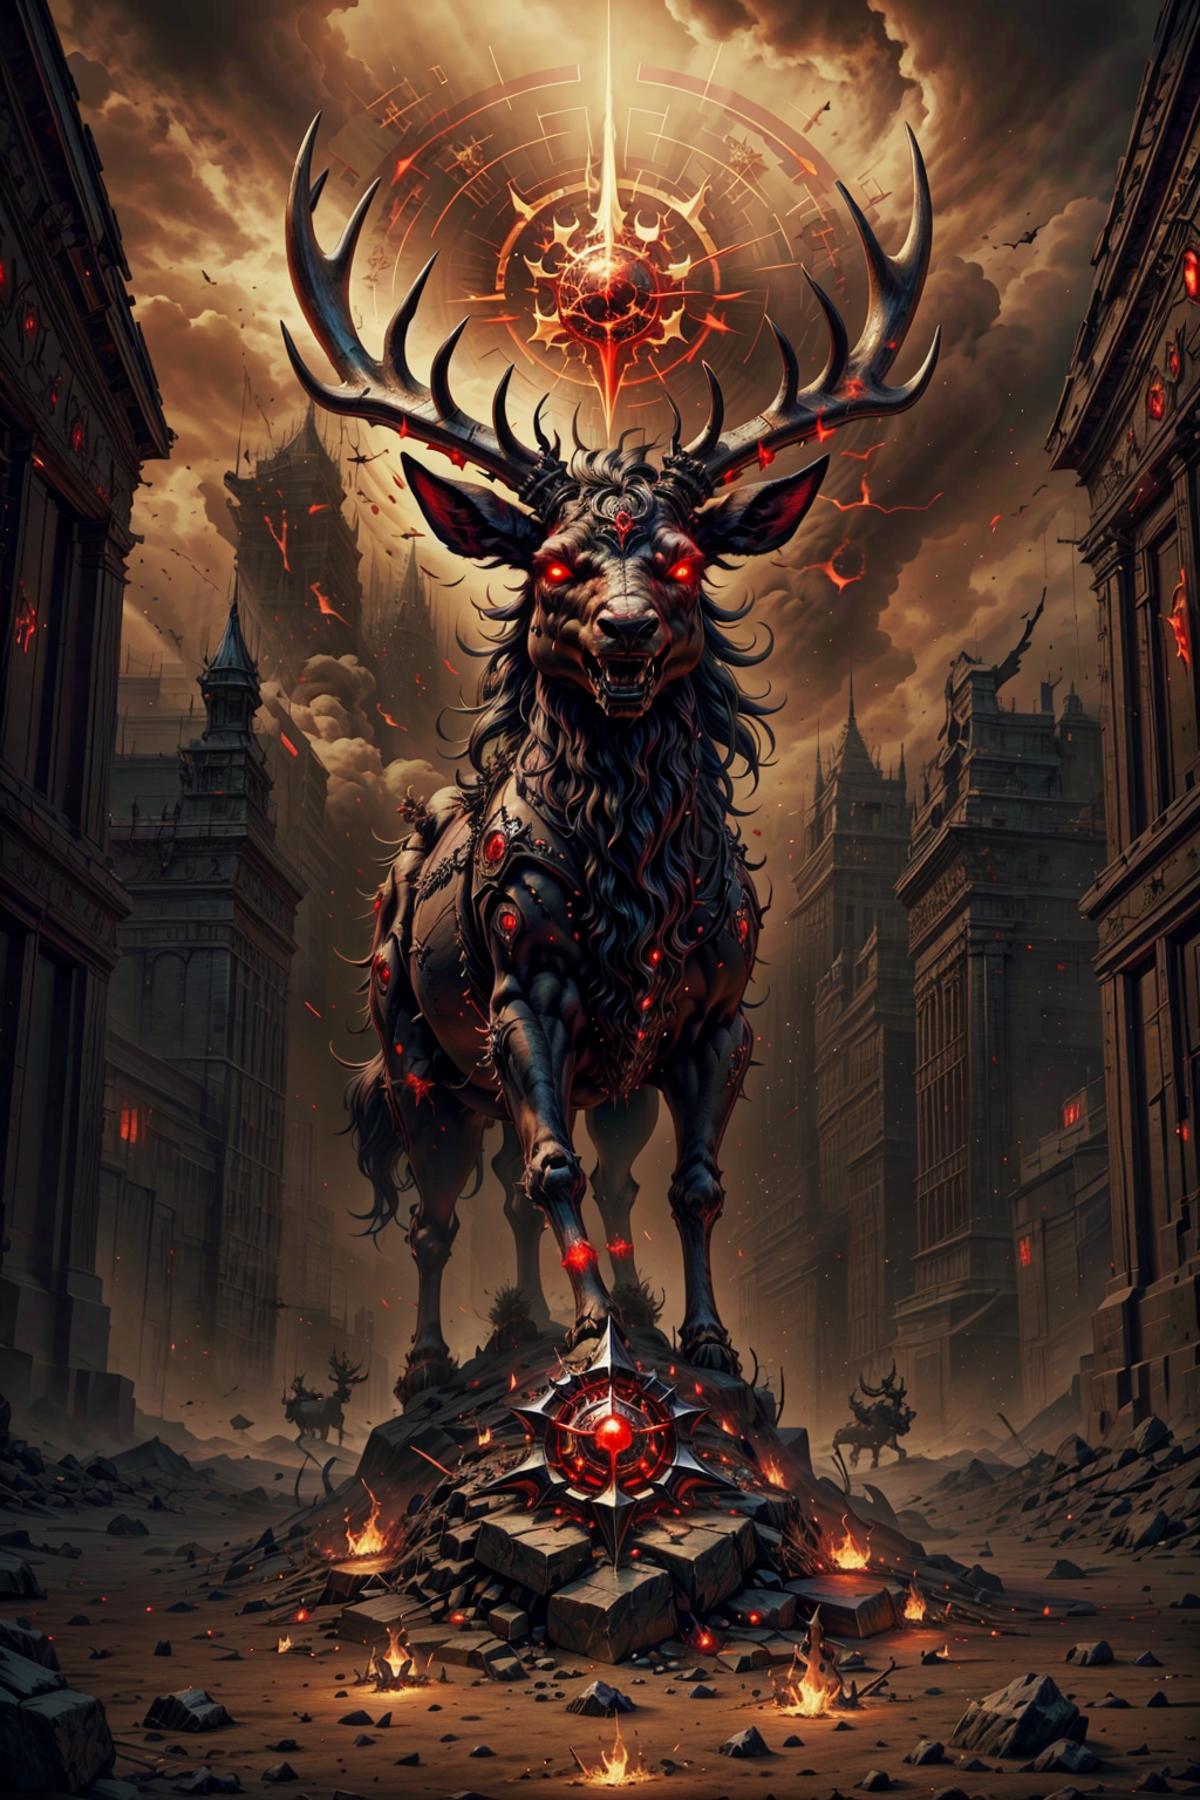 Raging Reindeer Style - Red Team Art image by theunlikely